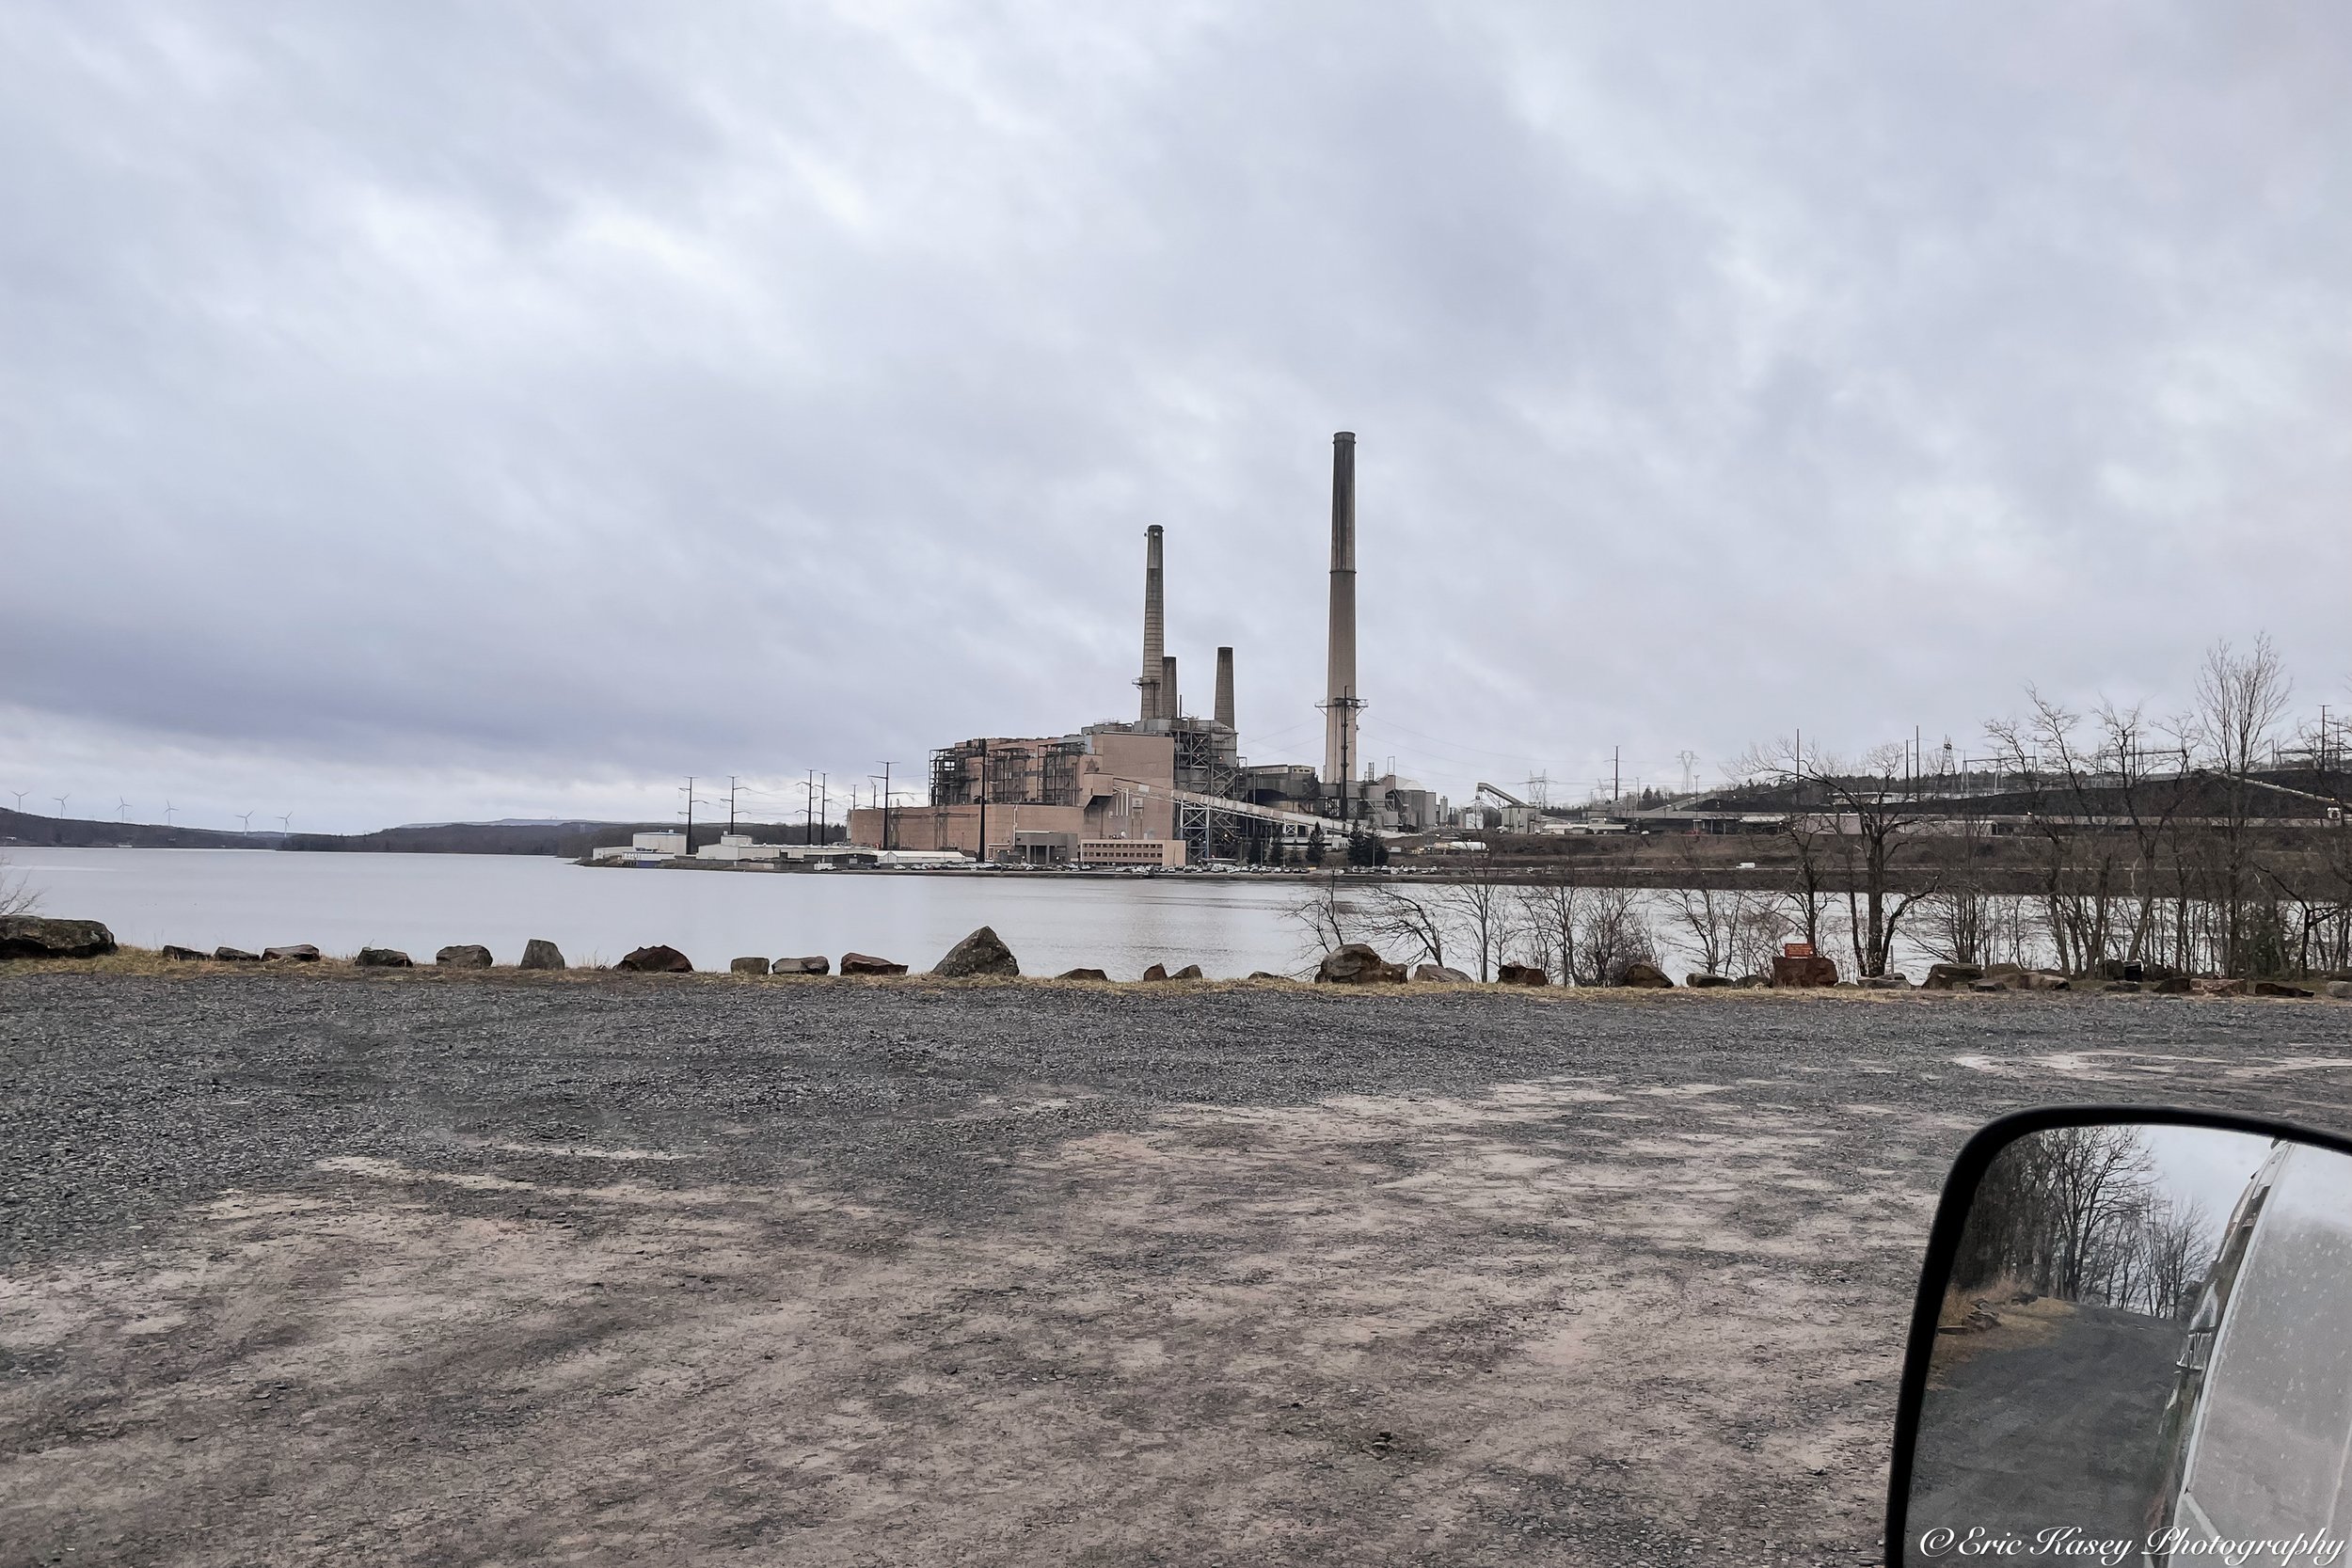 64 - The Dominion Power Station of Mount Storm, WV on April 5th, 2022.jpg